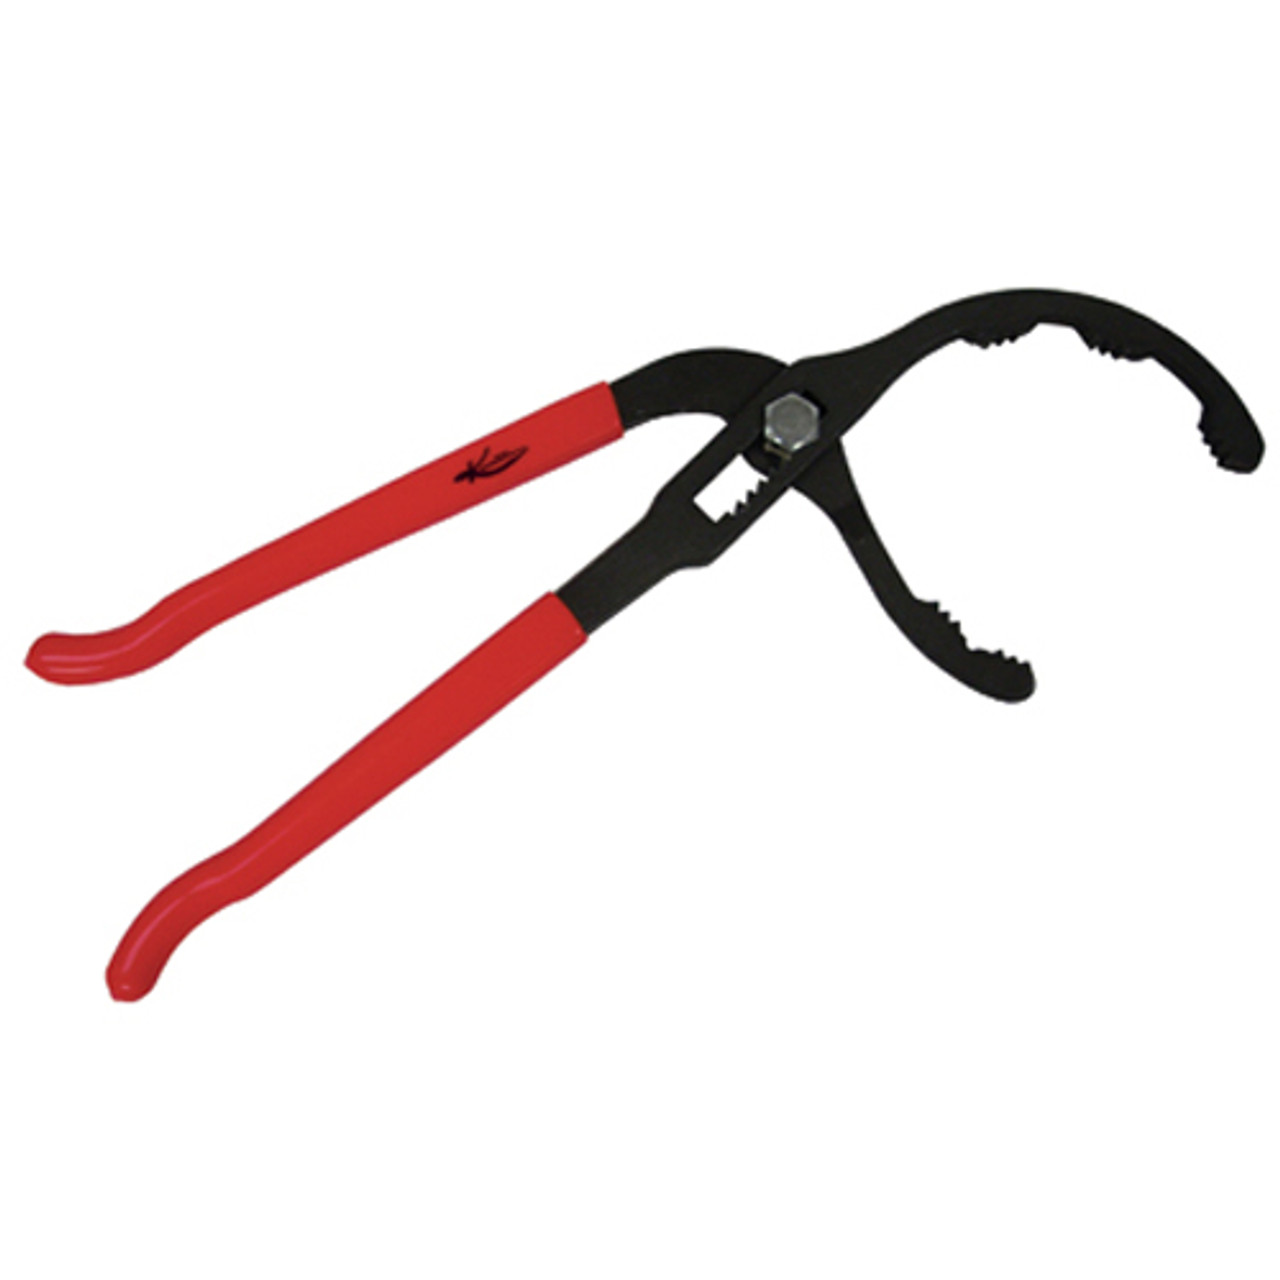 K Tool 73621 Oil Filter Pliers, for Trucks and Tractors, 4 to 7 Jaw  Opening, Spring Loaded, 17 Handles